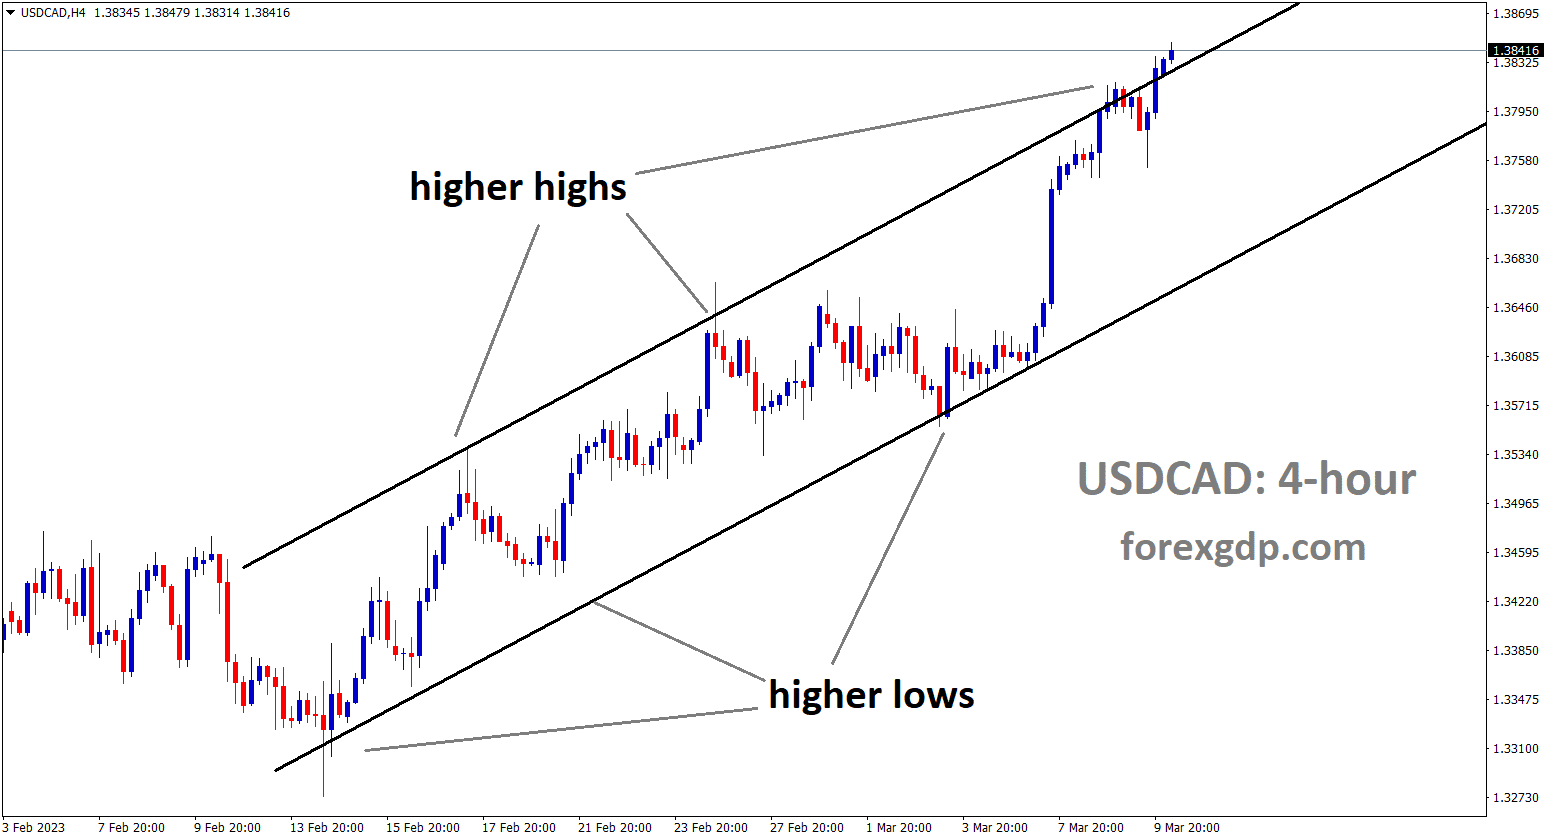 USDCAD is moving in a ascending channel and the market has reached the higher high area of the channel